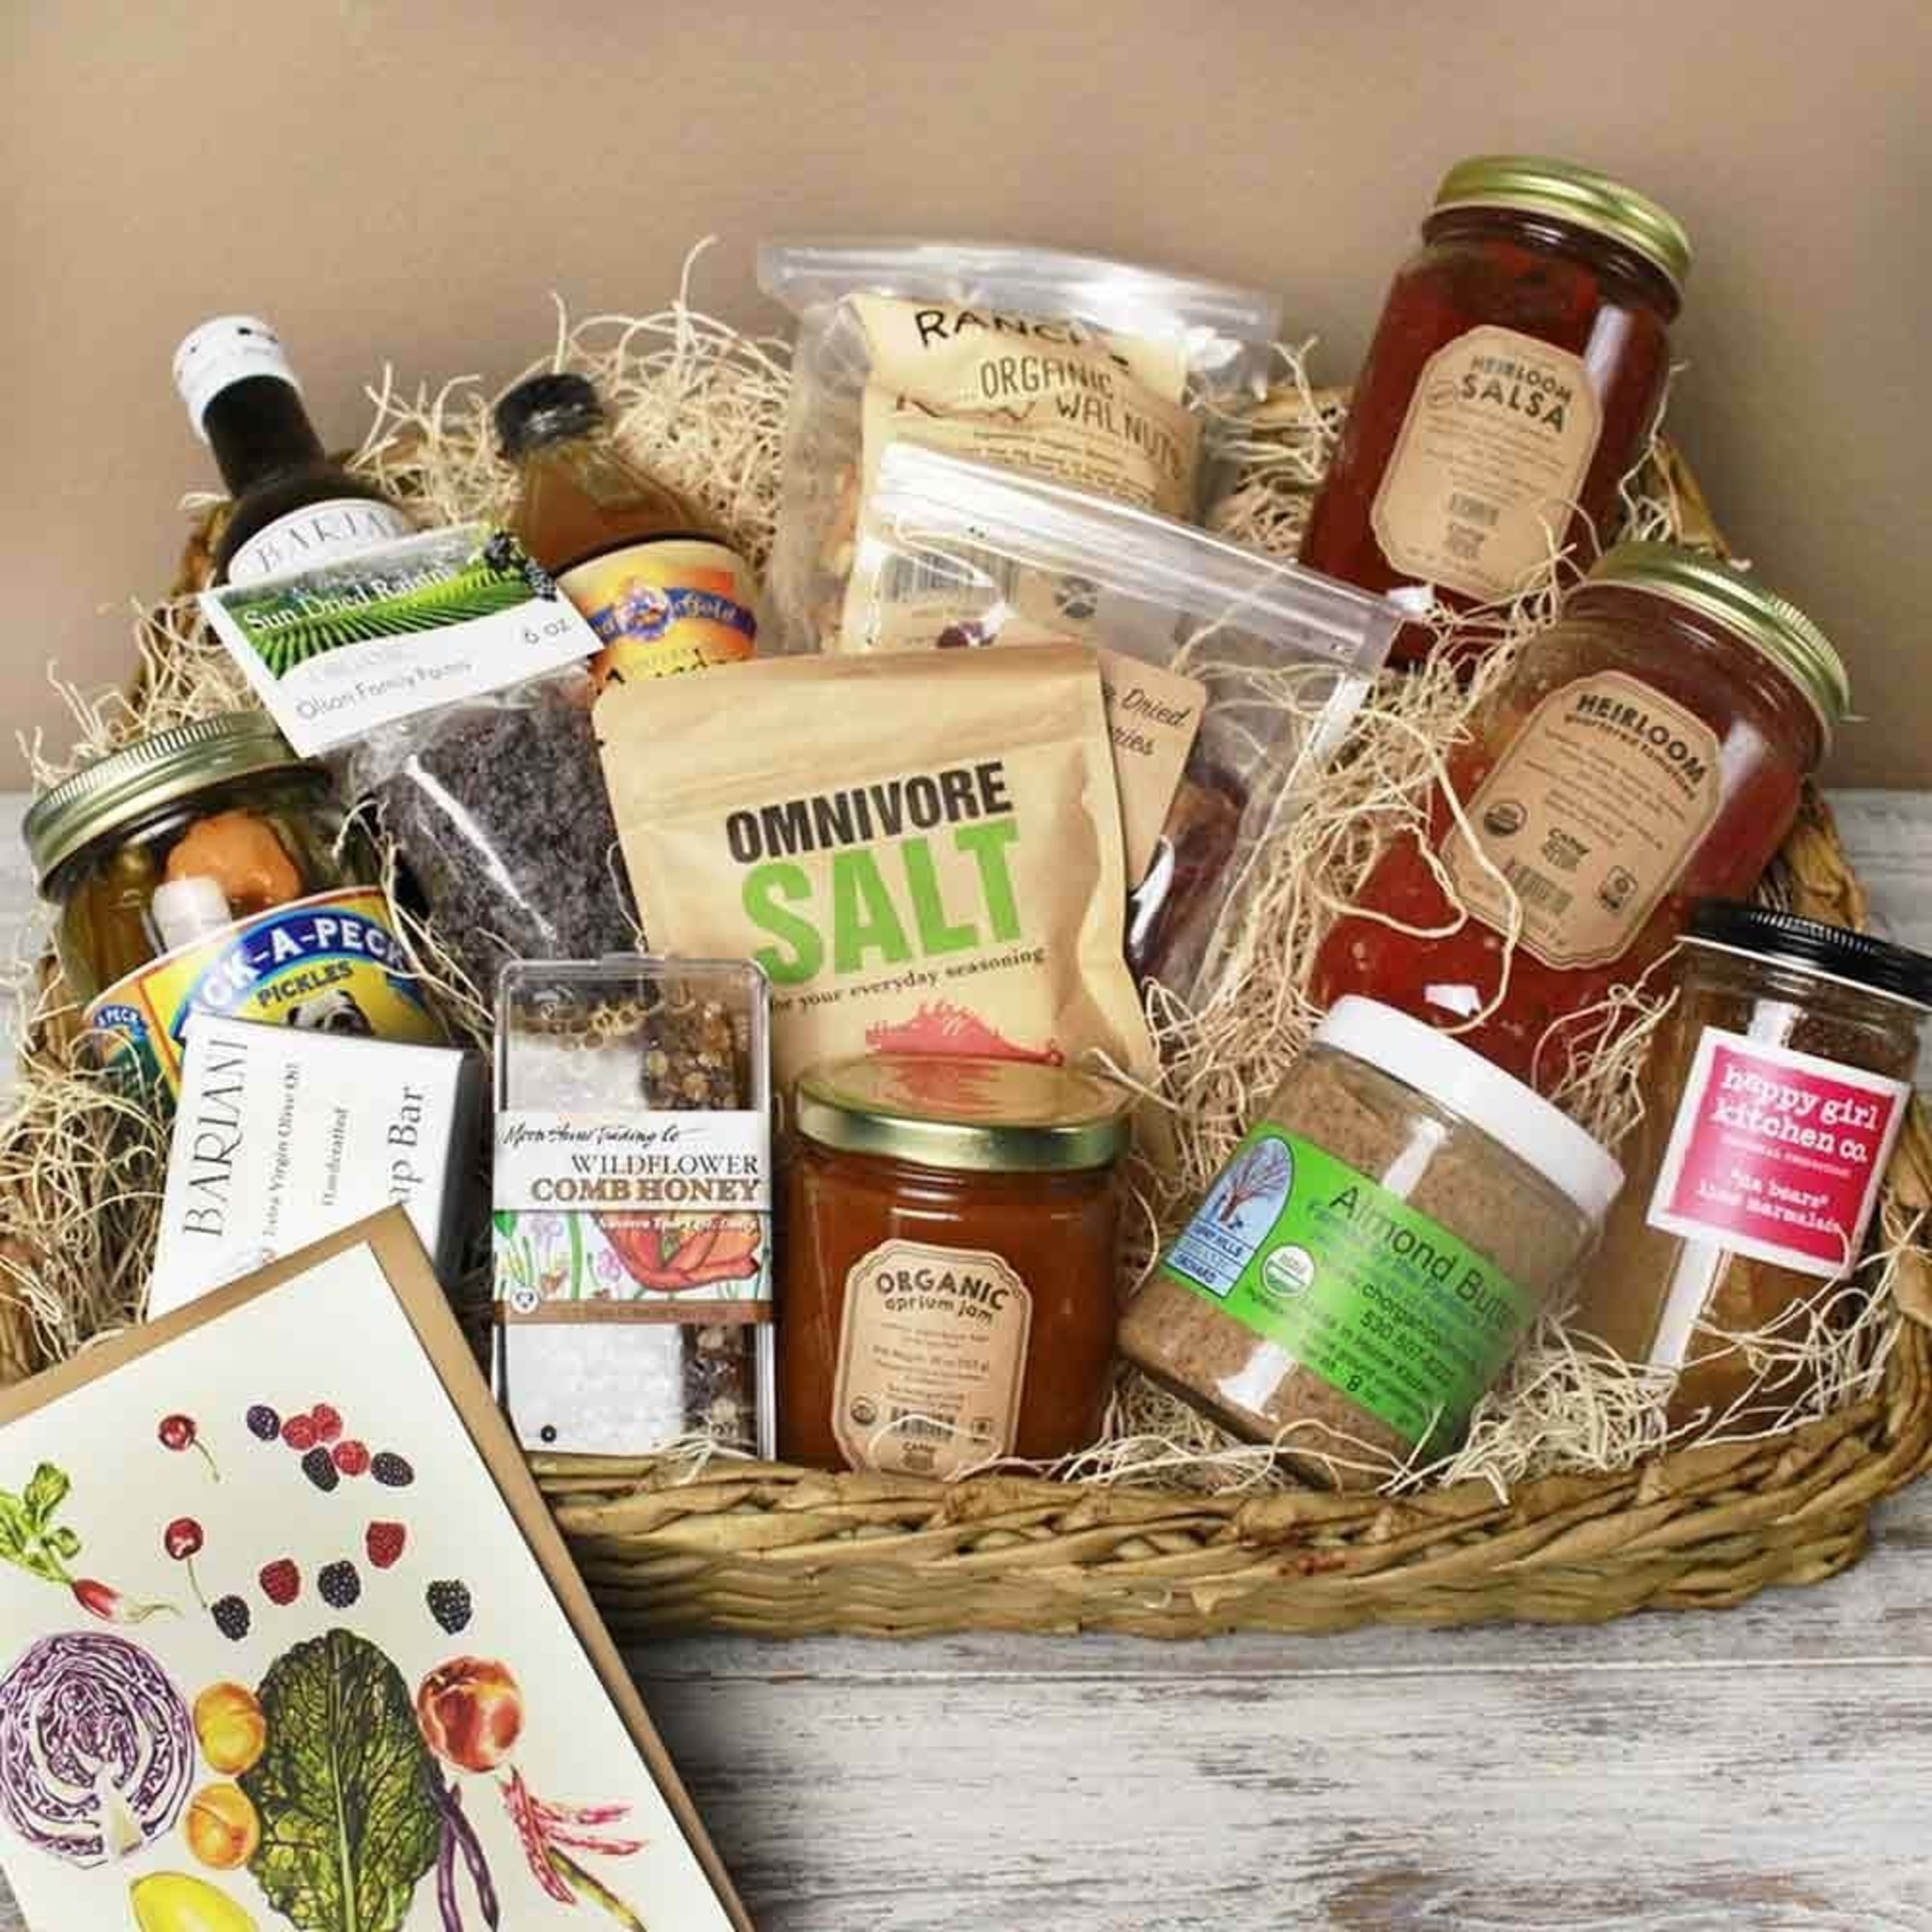 Farm Fresh To You offers gift items and baskets this holiday season.